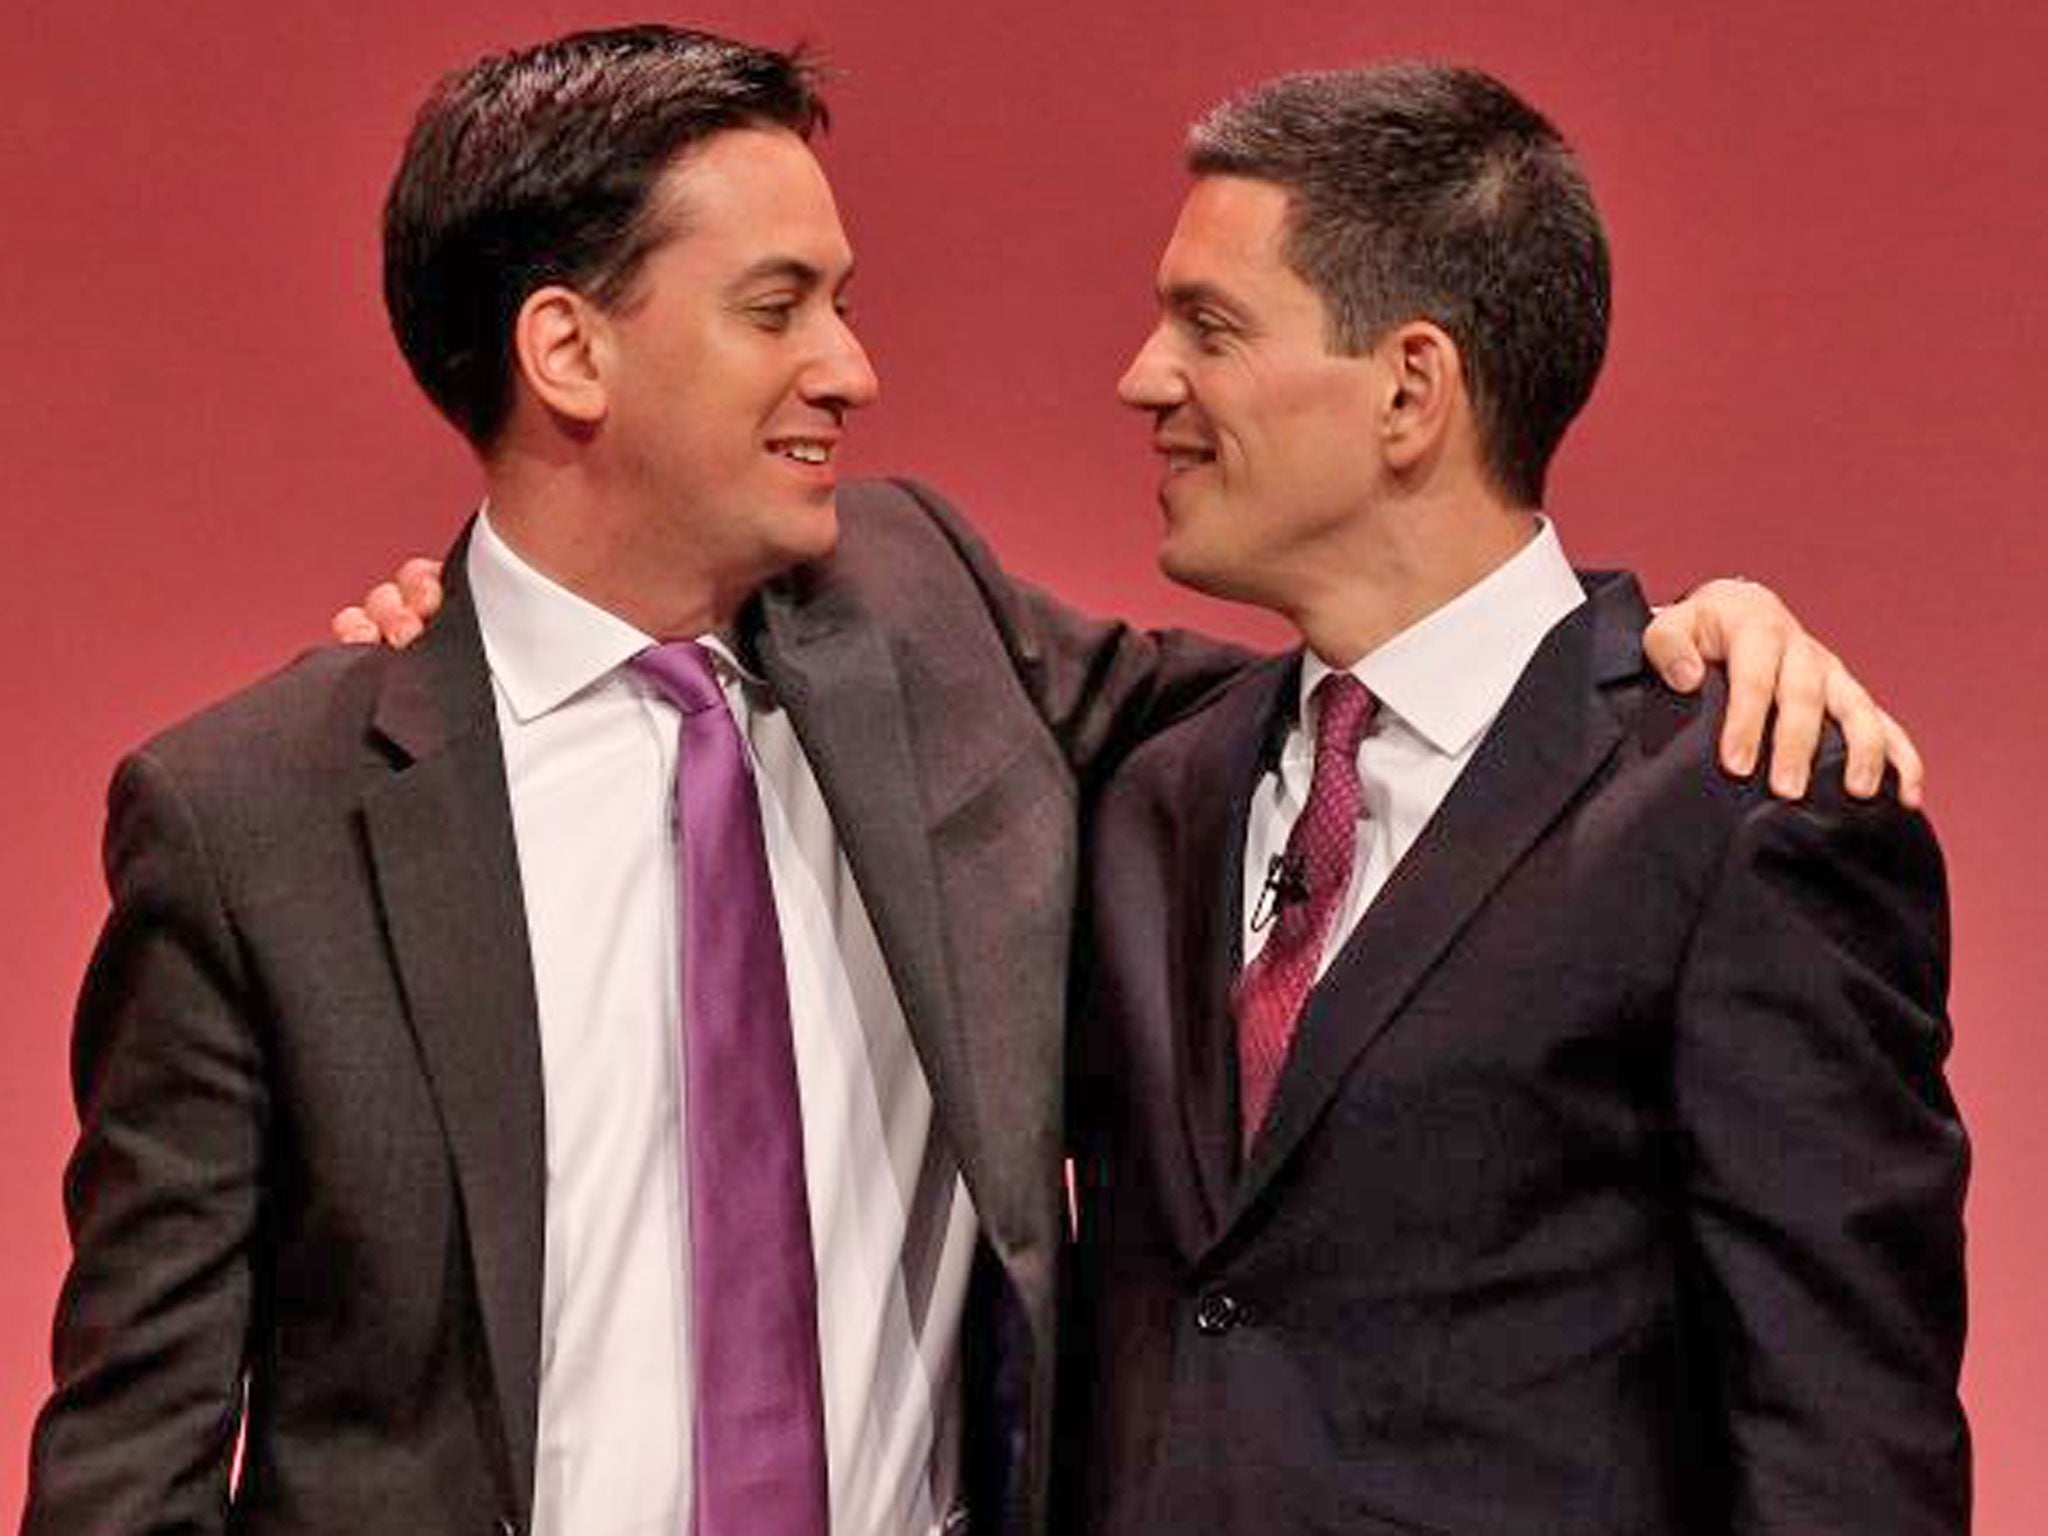 Ed and David the Labour Miliband brothers